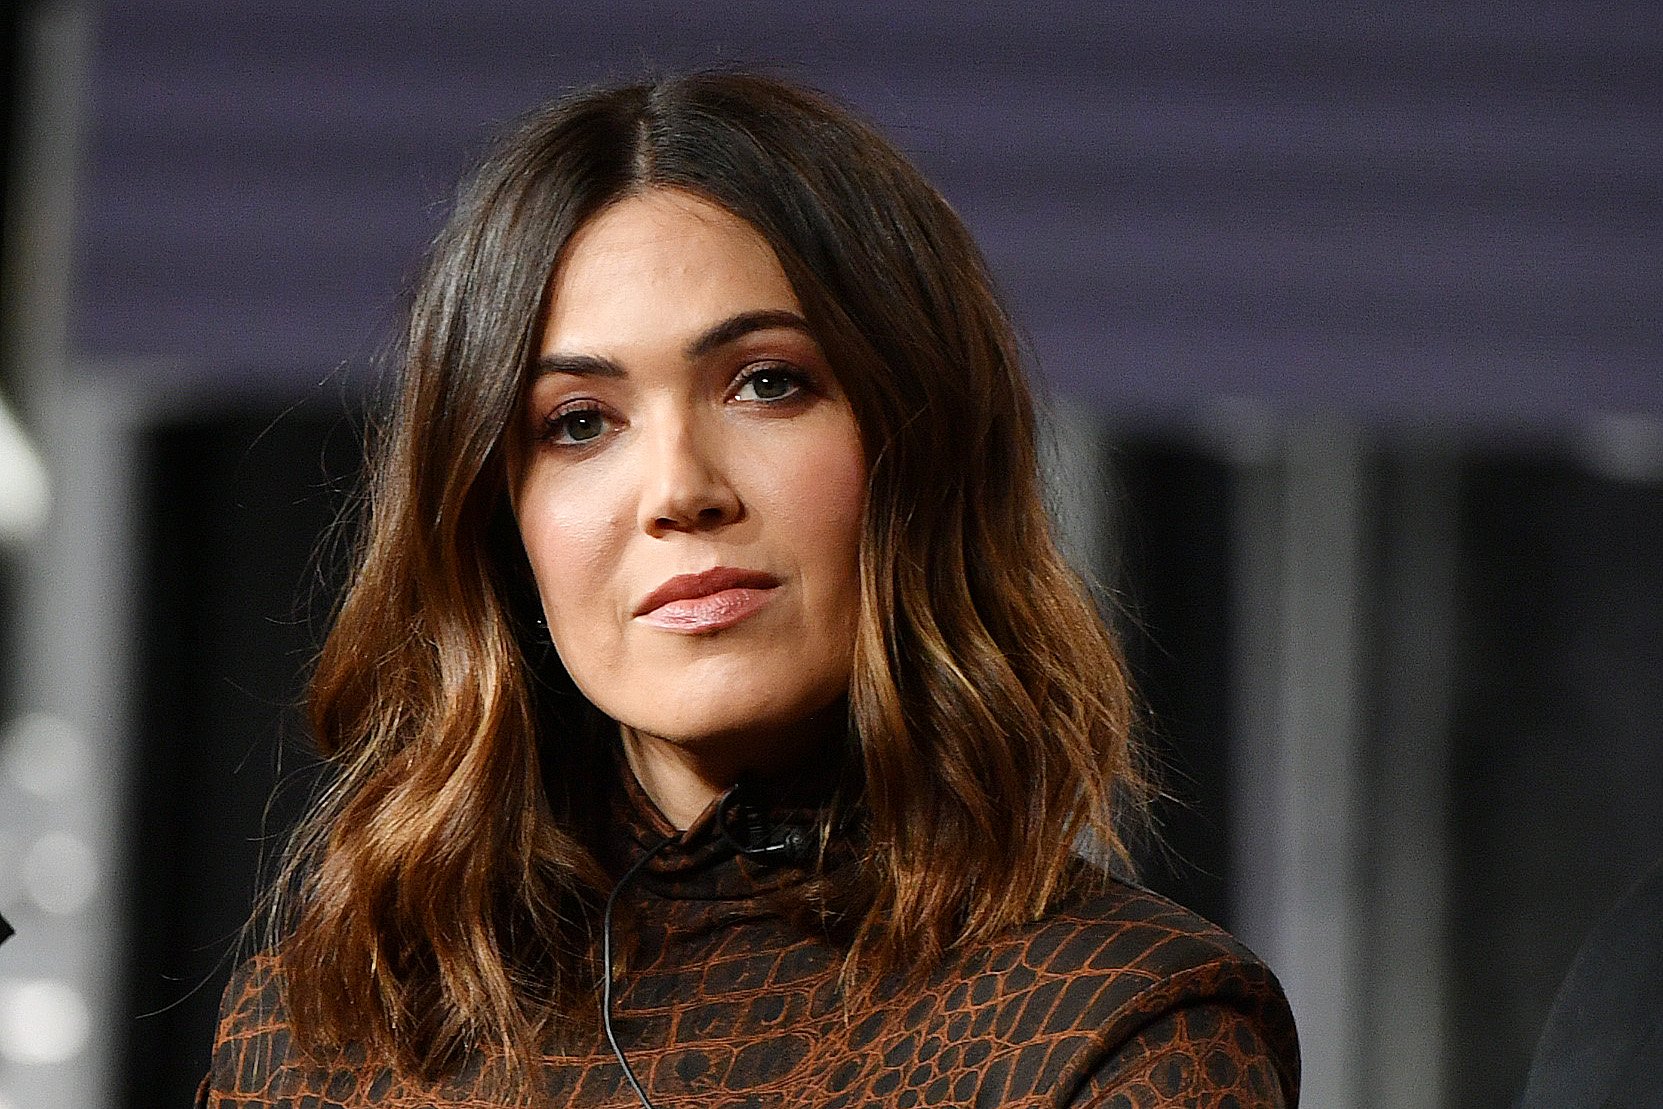 Mandy Moore attend the 2020 Winter TCA Press Tour at The Langham Huntington, Pasadena on January 11, 2020, in Pasadena, California. | Source: Getty Images.